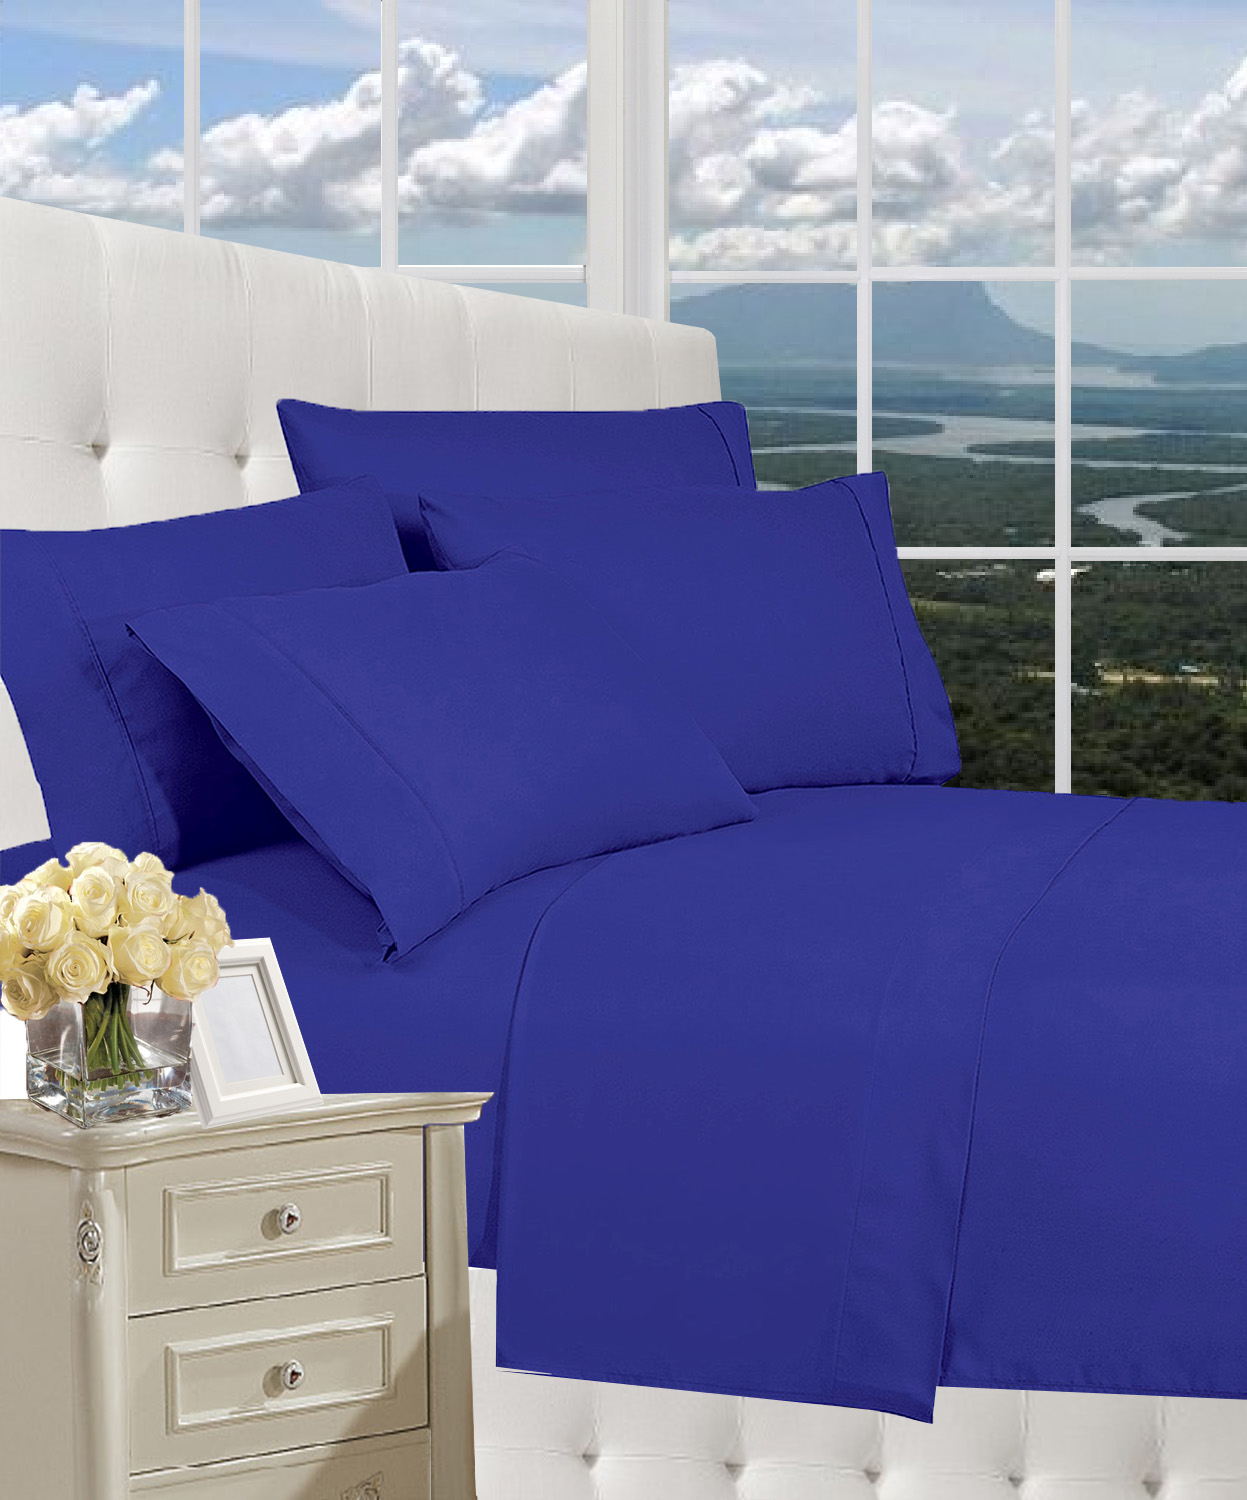 Elegant Comfort 1800 Series Wrinkle Resistant Egyptian Quality Hypoallergenic Ultra Soft Luxury 4-piece Bed Sheet Set, Full, Royal Blue